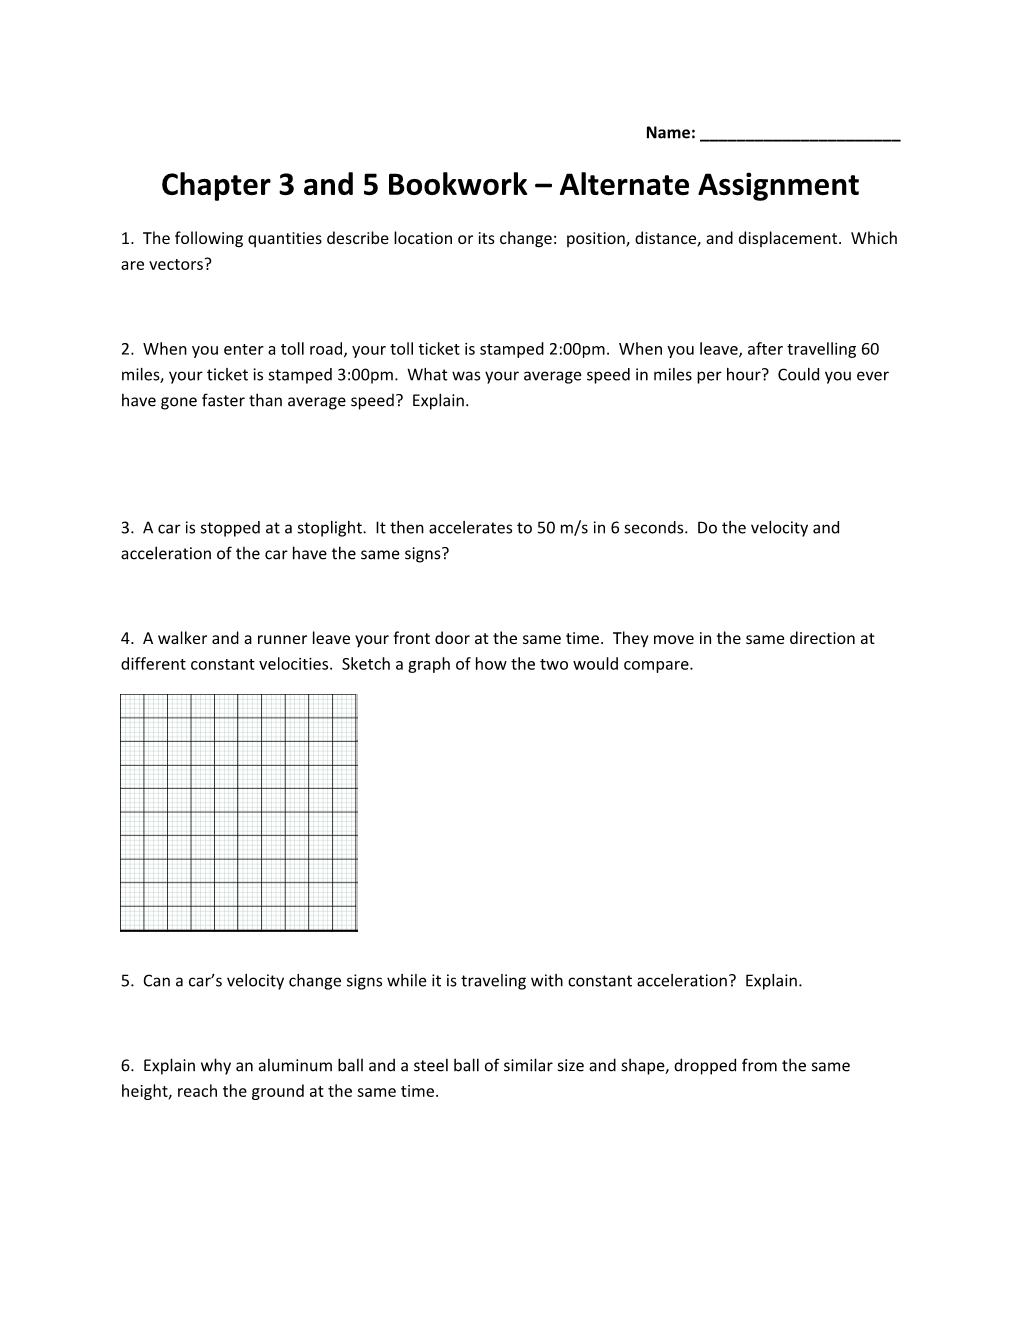 Chapter 3 and 5 Bookwork Alternate Assignment